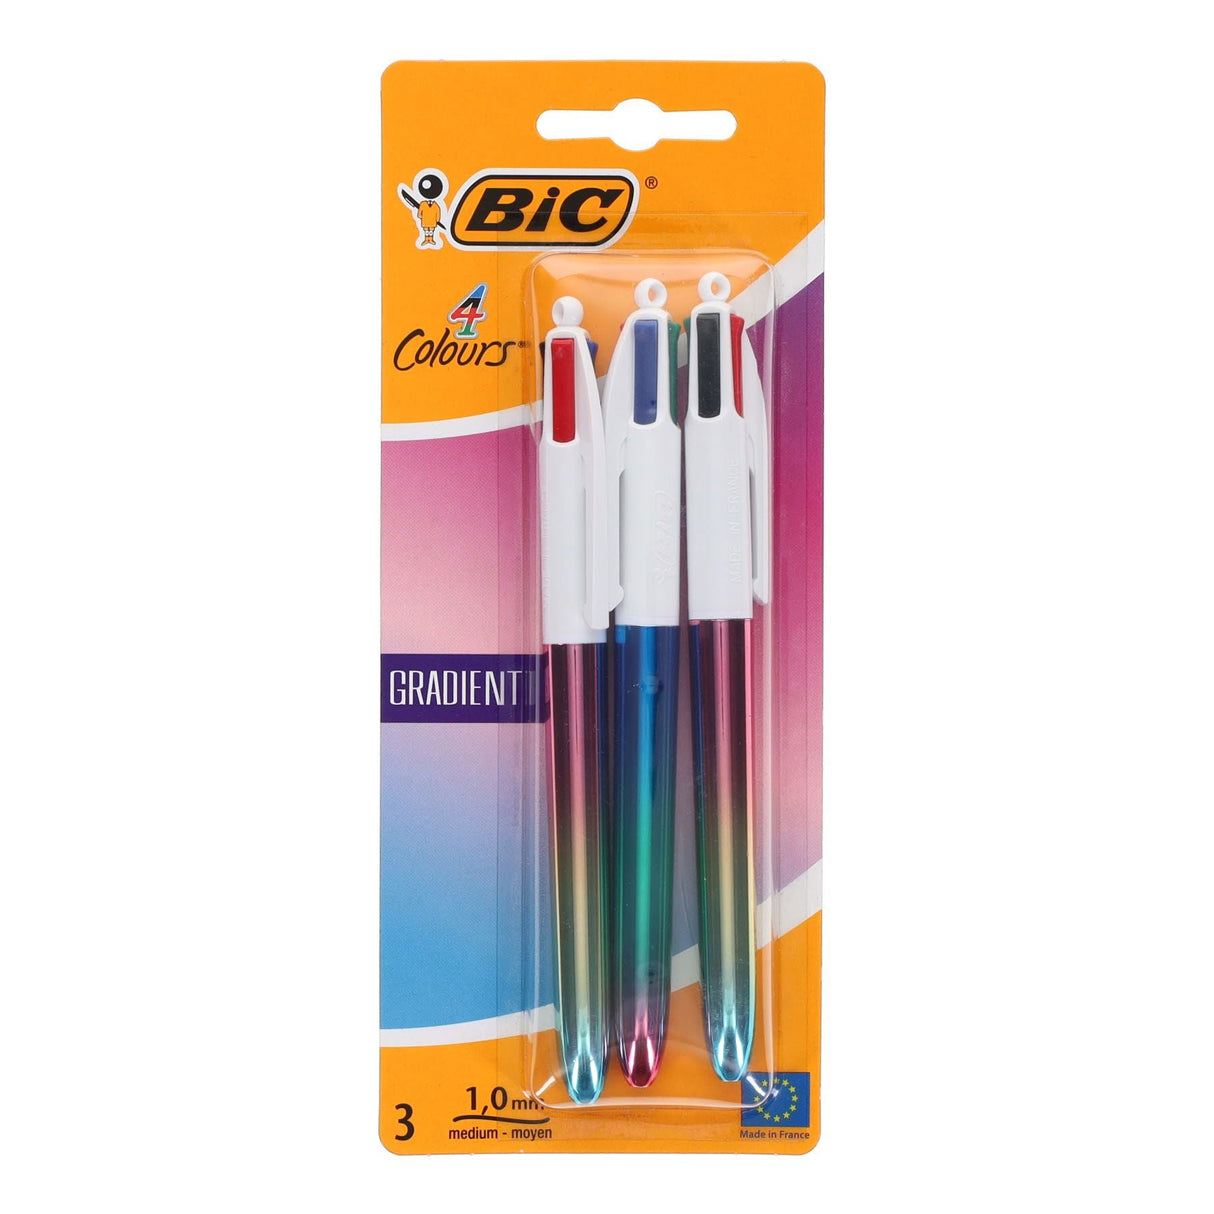 BIC 4 Colour Ballpoint Pens Gradient Design - Pack of 3-Ballpoint Pens-BIC | Buy Online at Stationery Shop